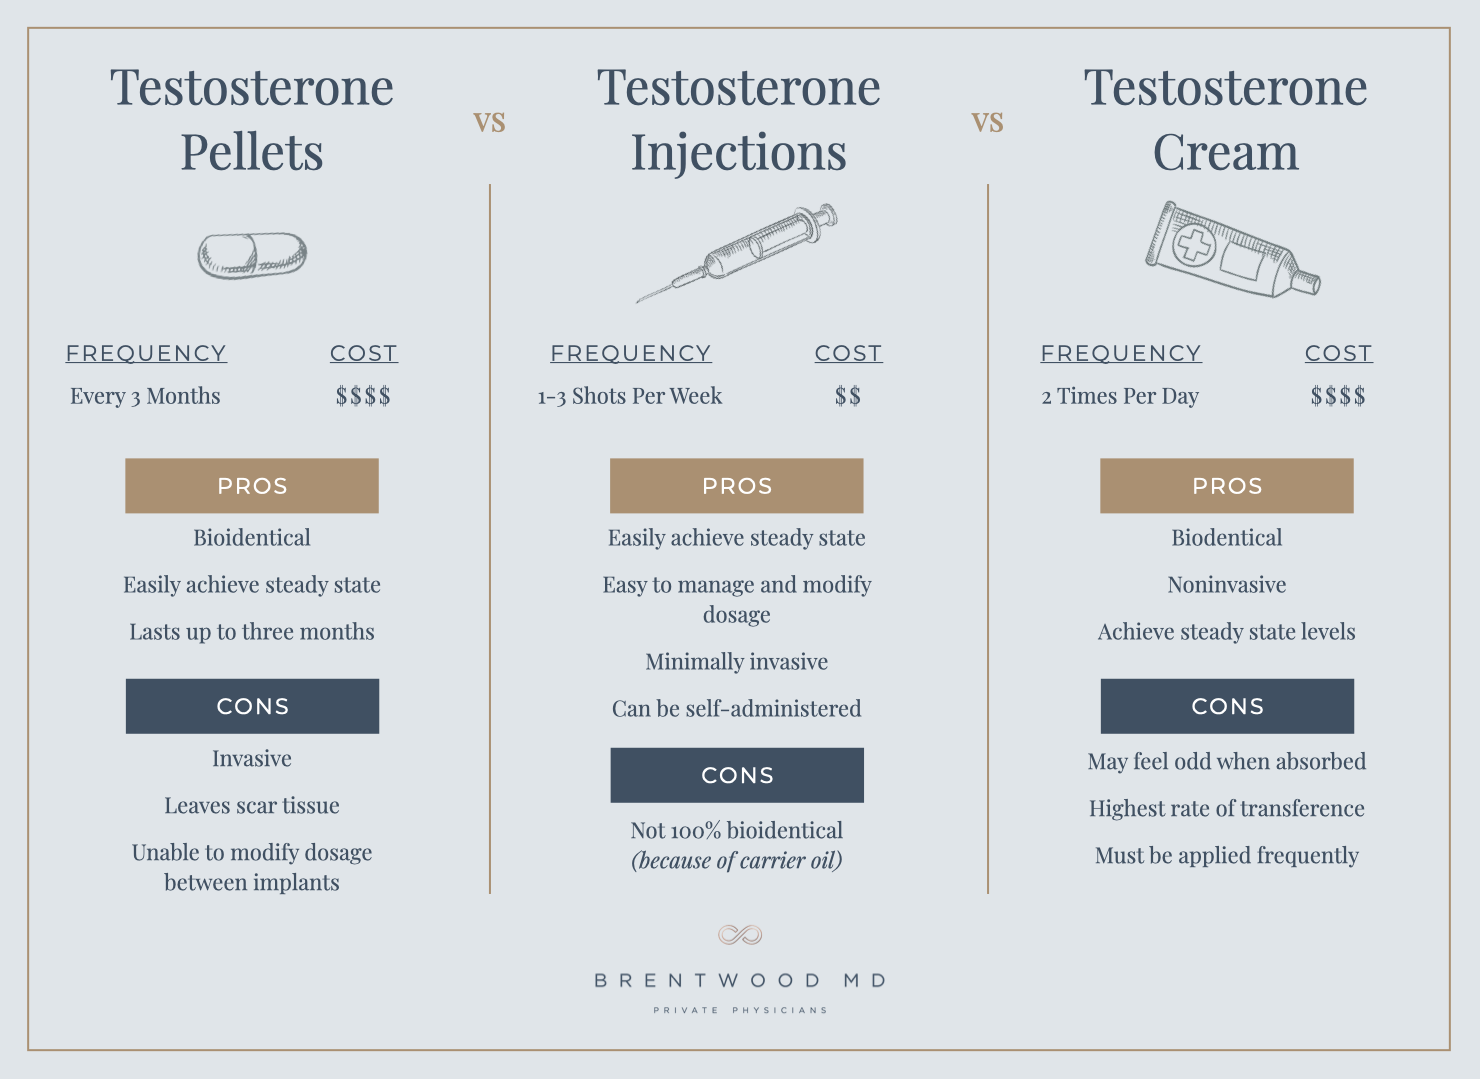 Testosterone Changes Chart